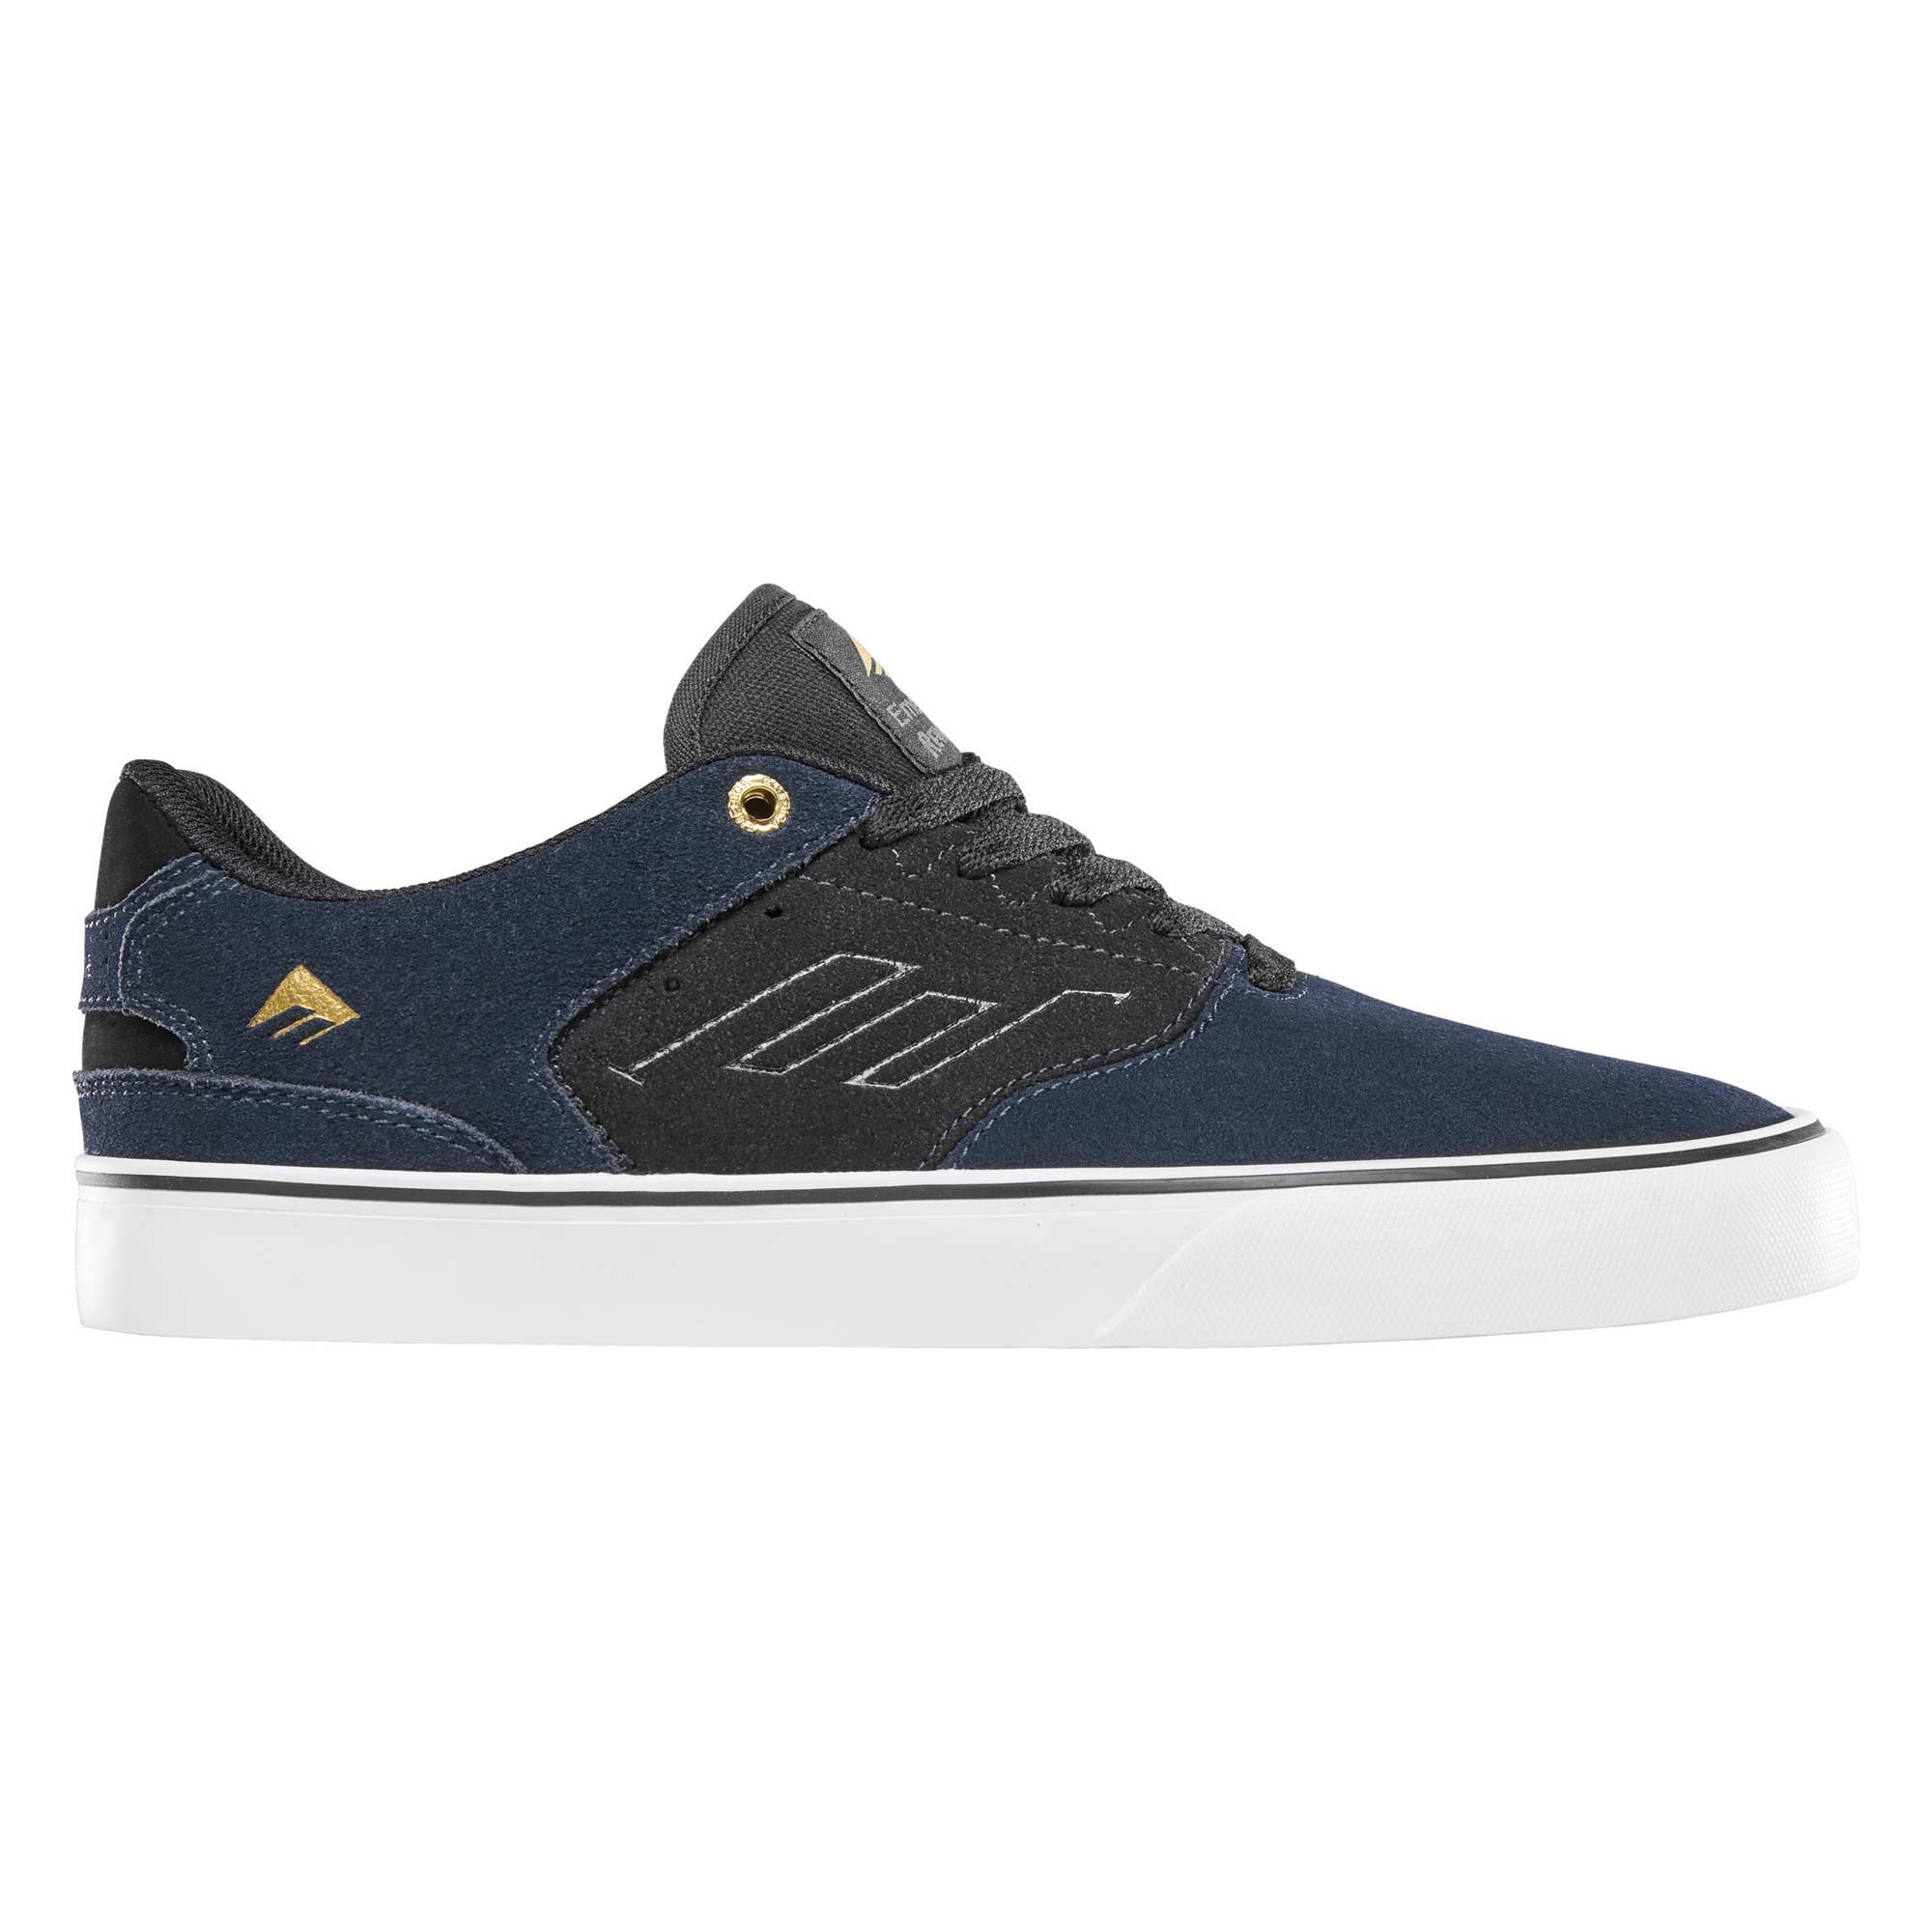 EMERICA Shoe THE REYNOLDS LOW VULC na/go/wh navy/gold/white